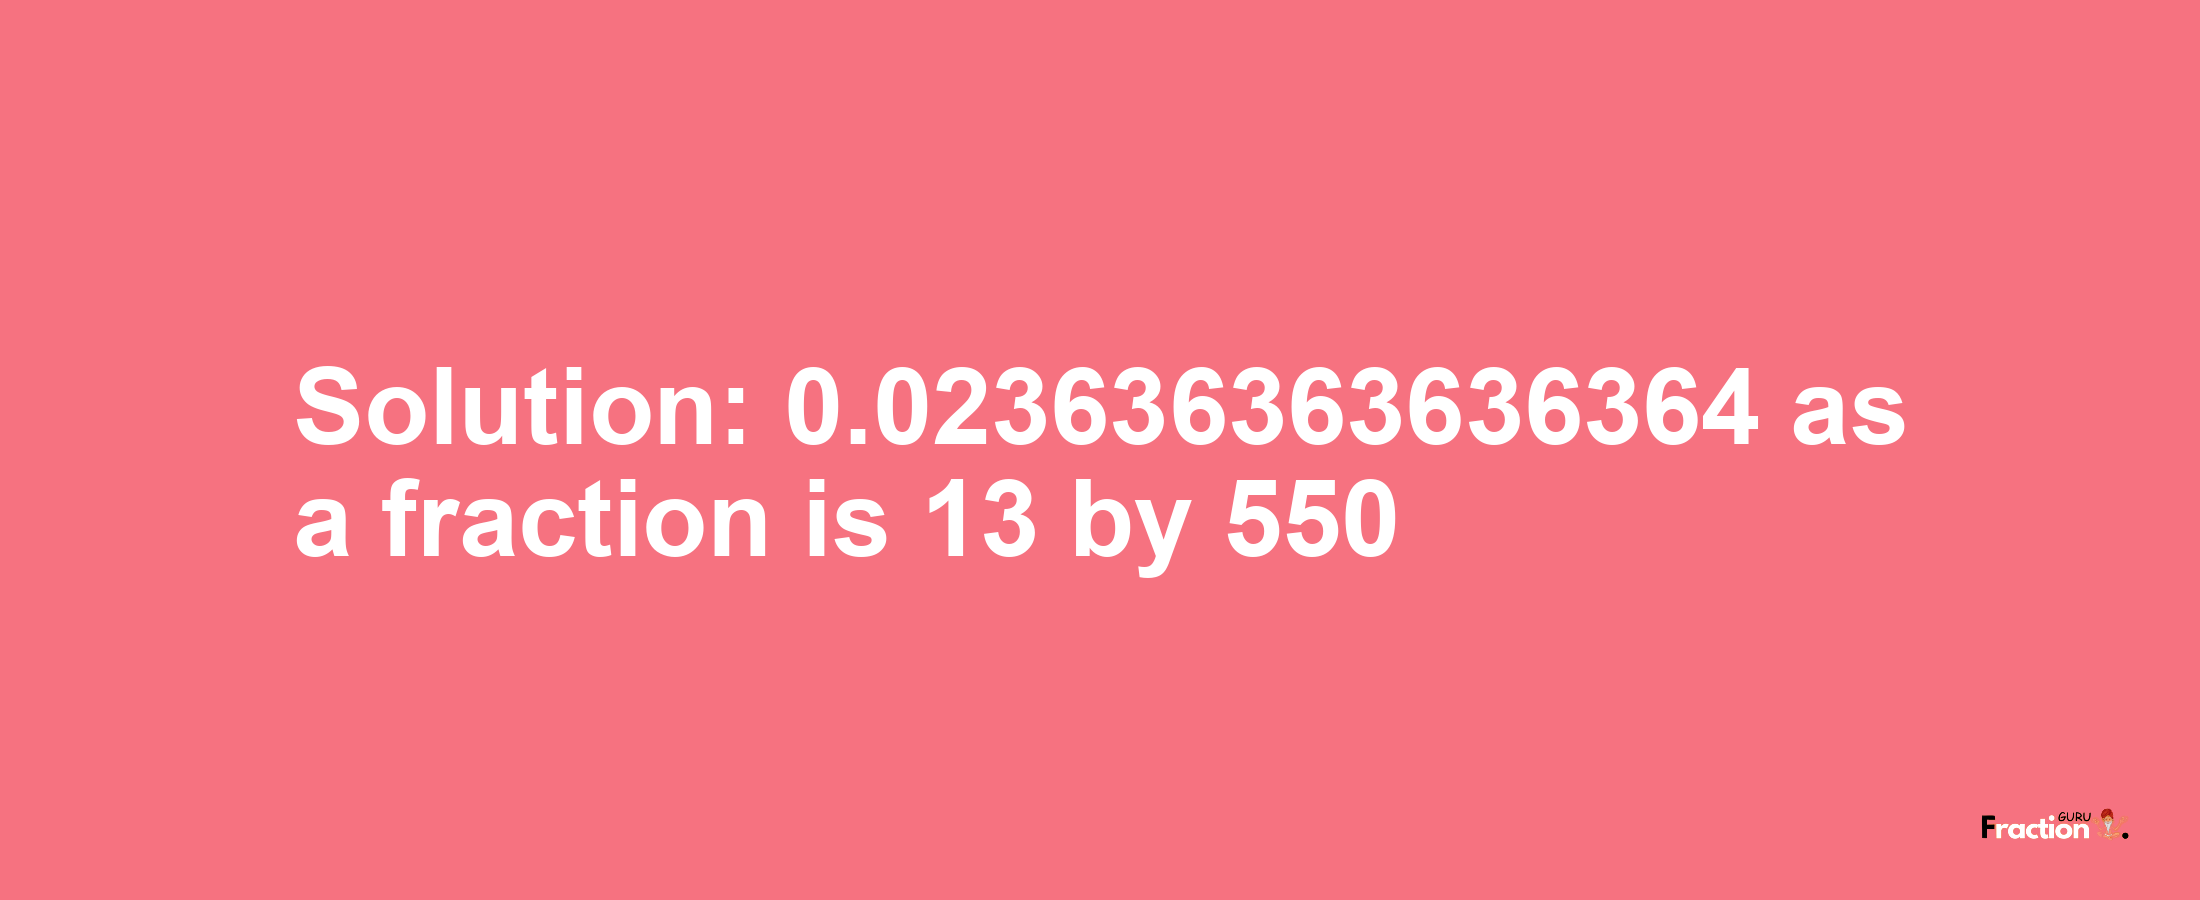 Solution:0.023636363636364 as a fraction is 13/550